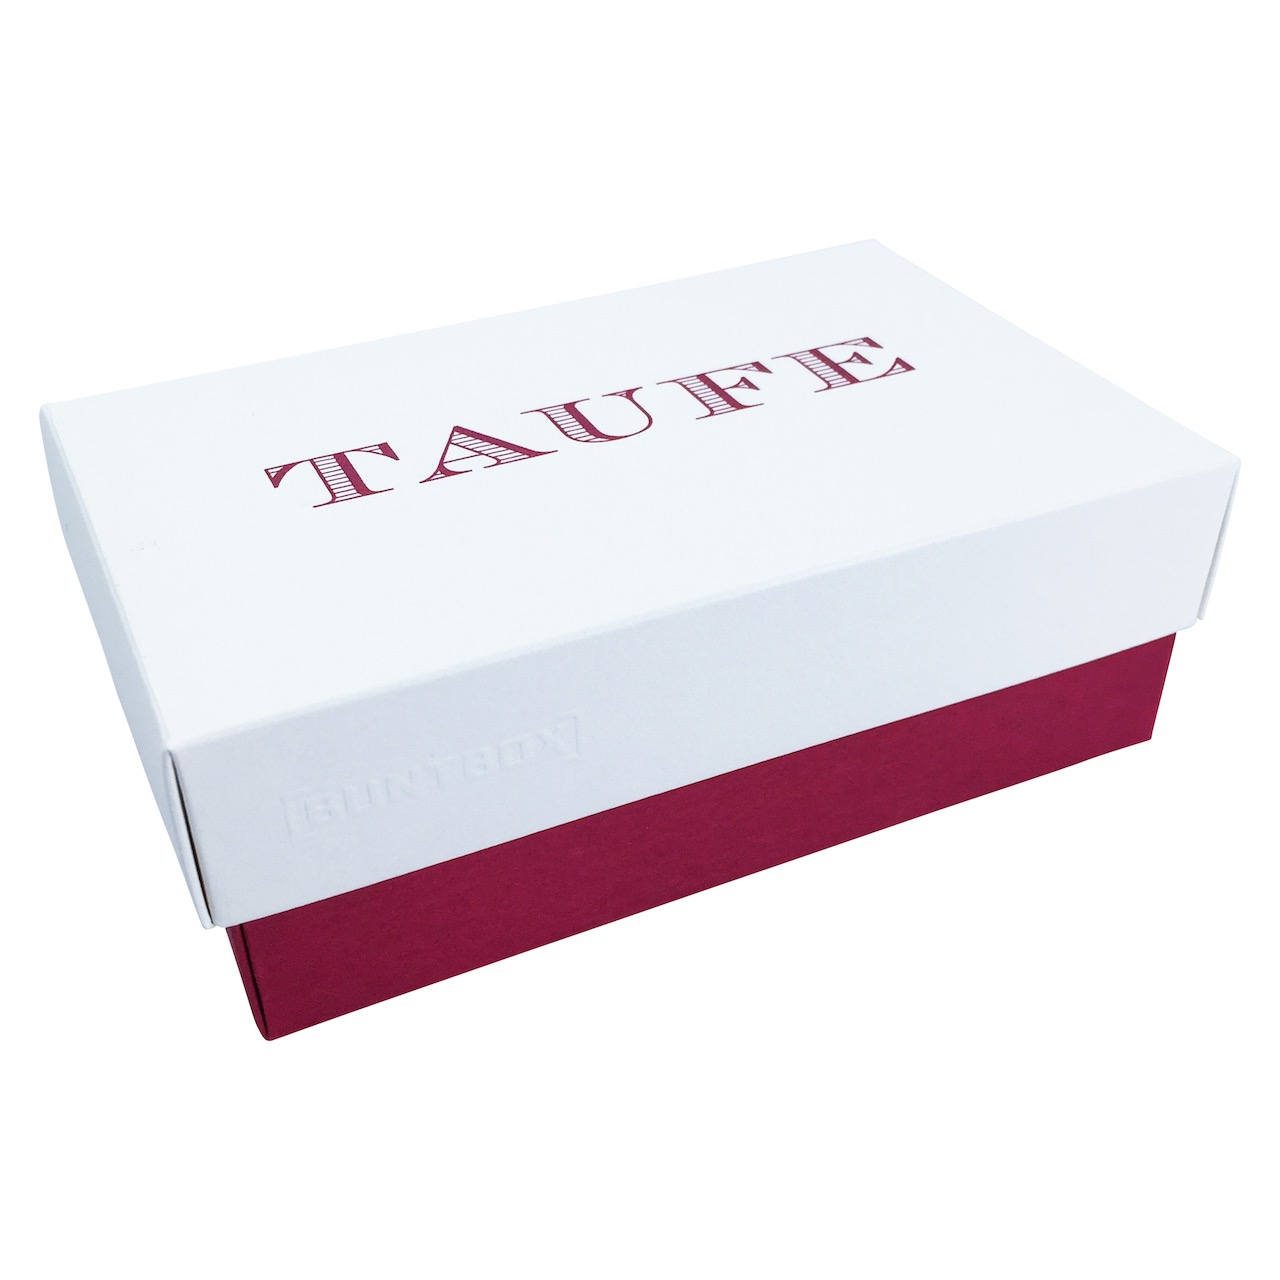 Buntbox M Fine Paper Taufe in Champagner-Bordeaux